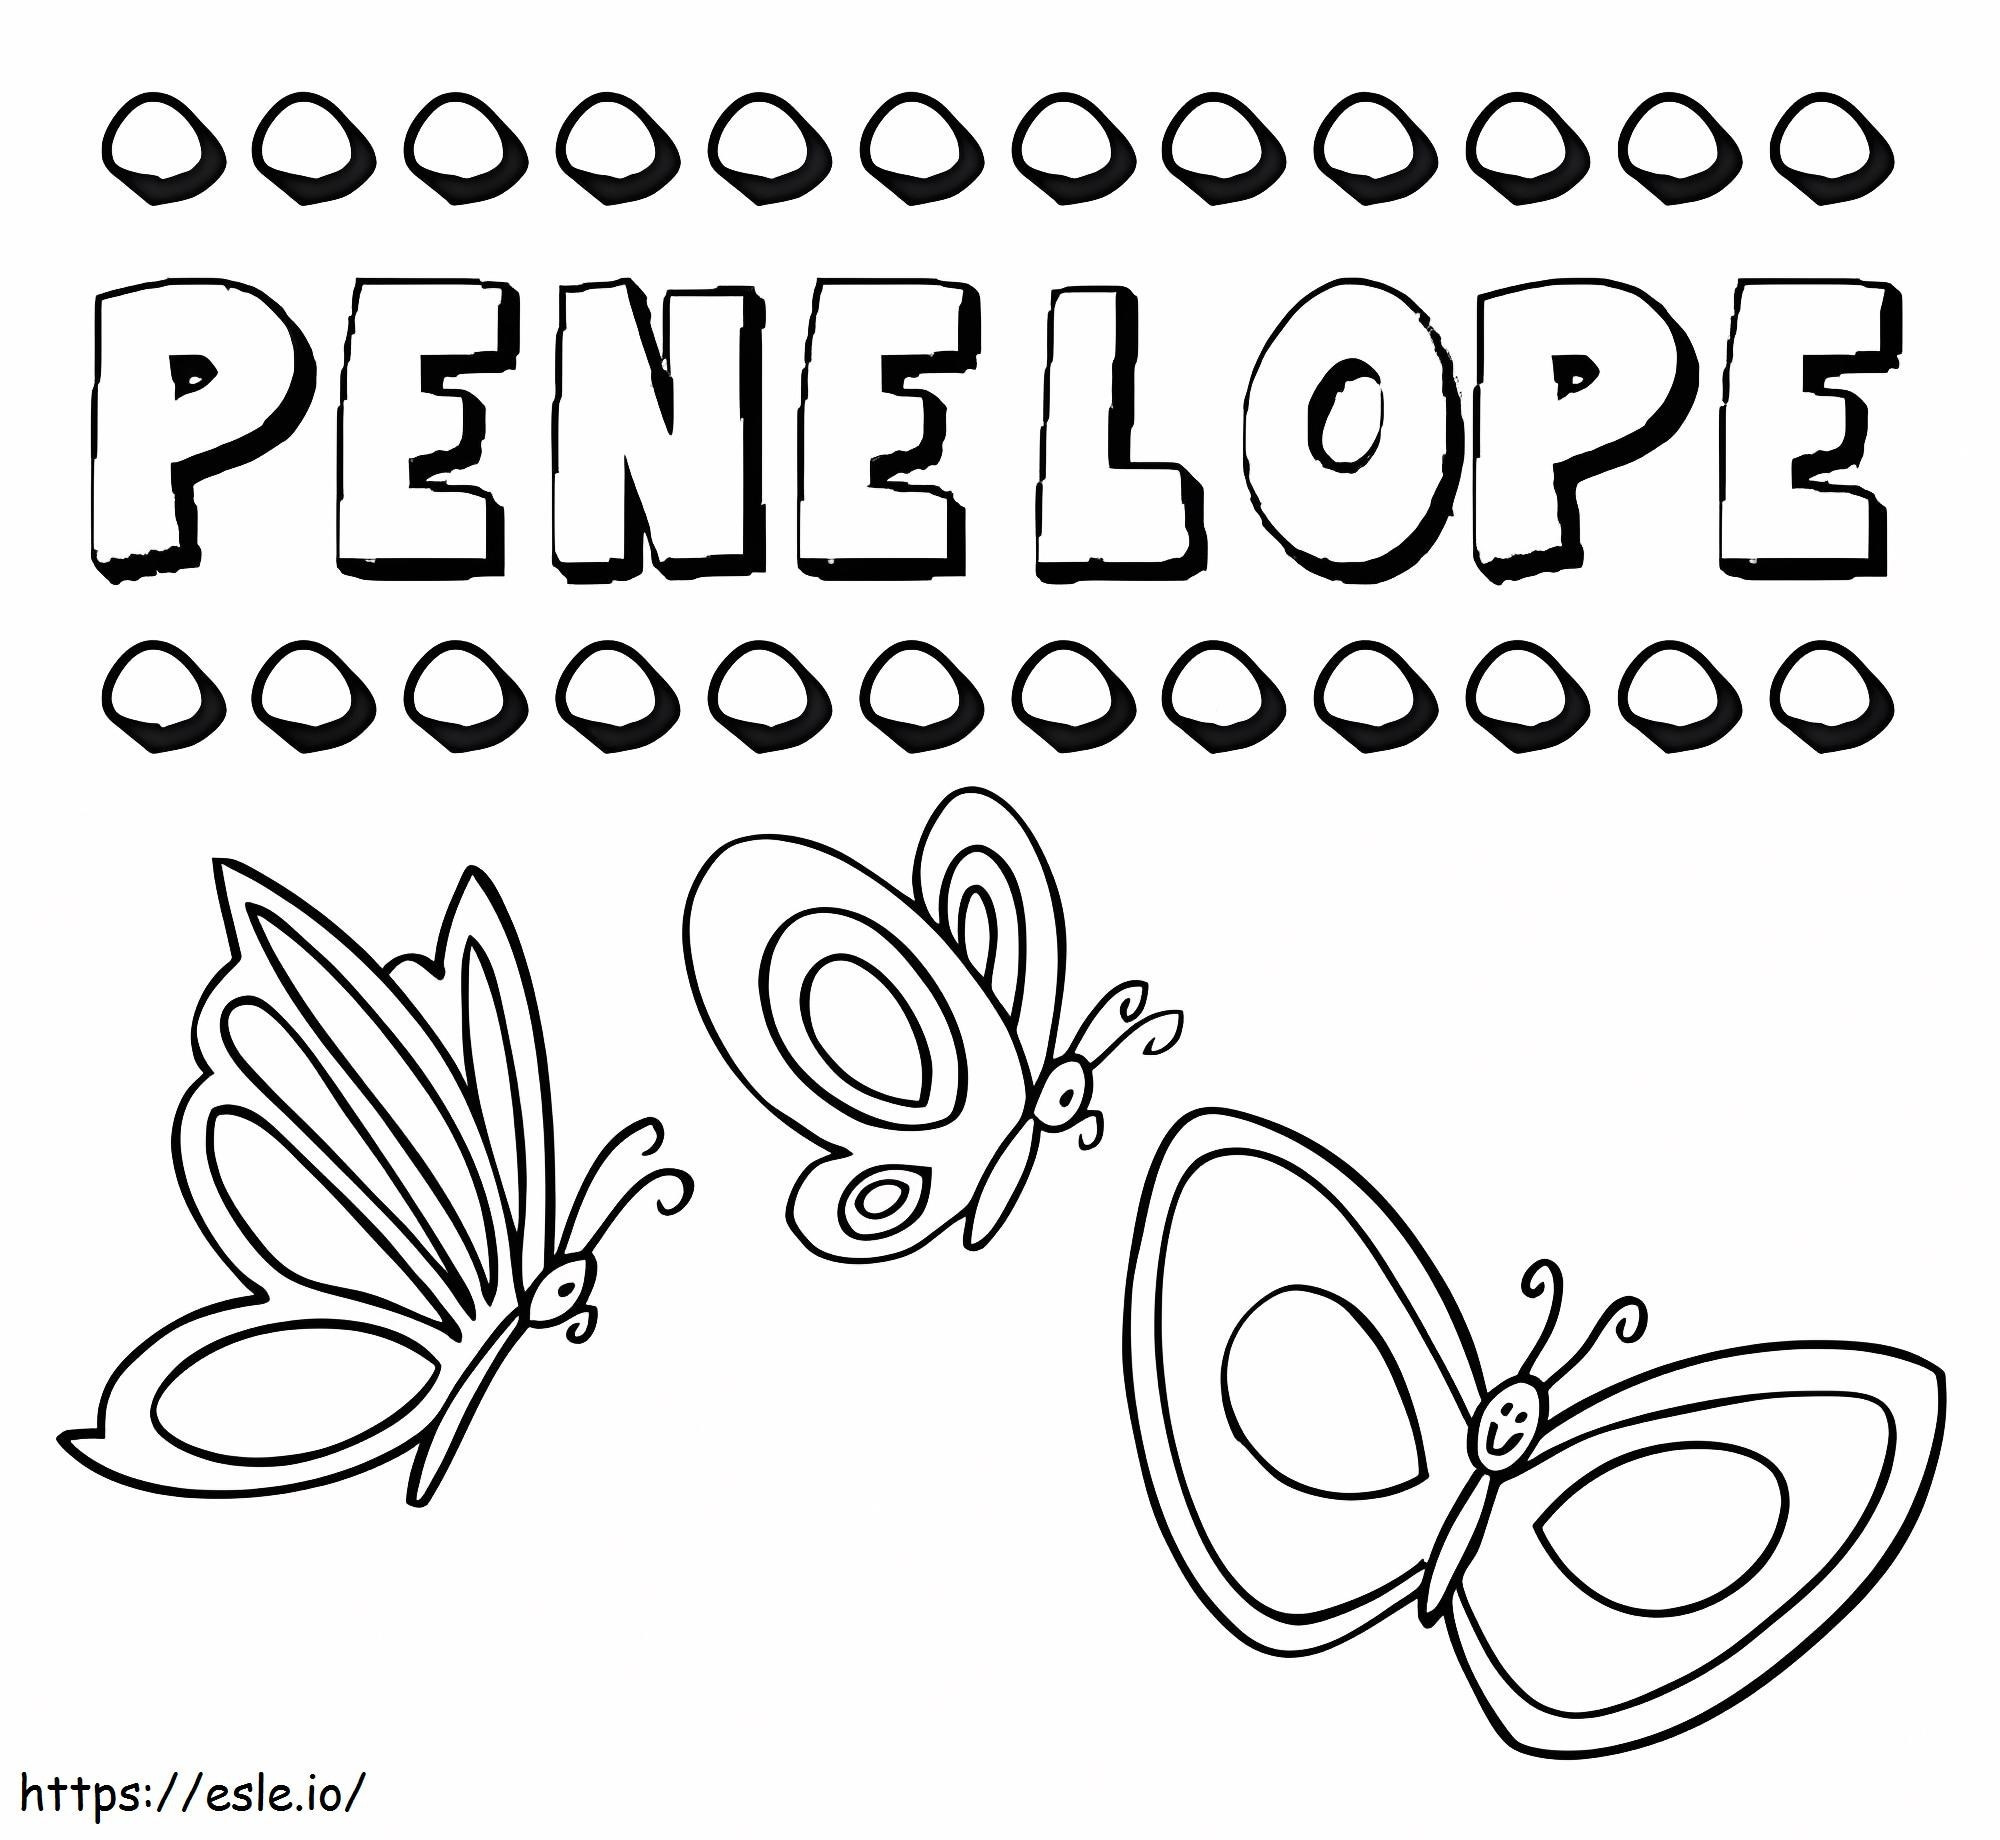 Print Penelope coloring page